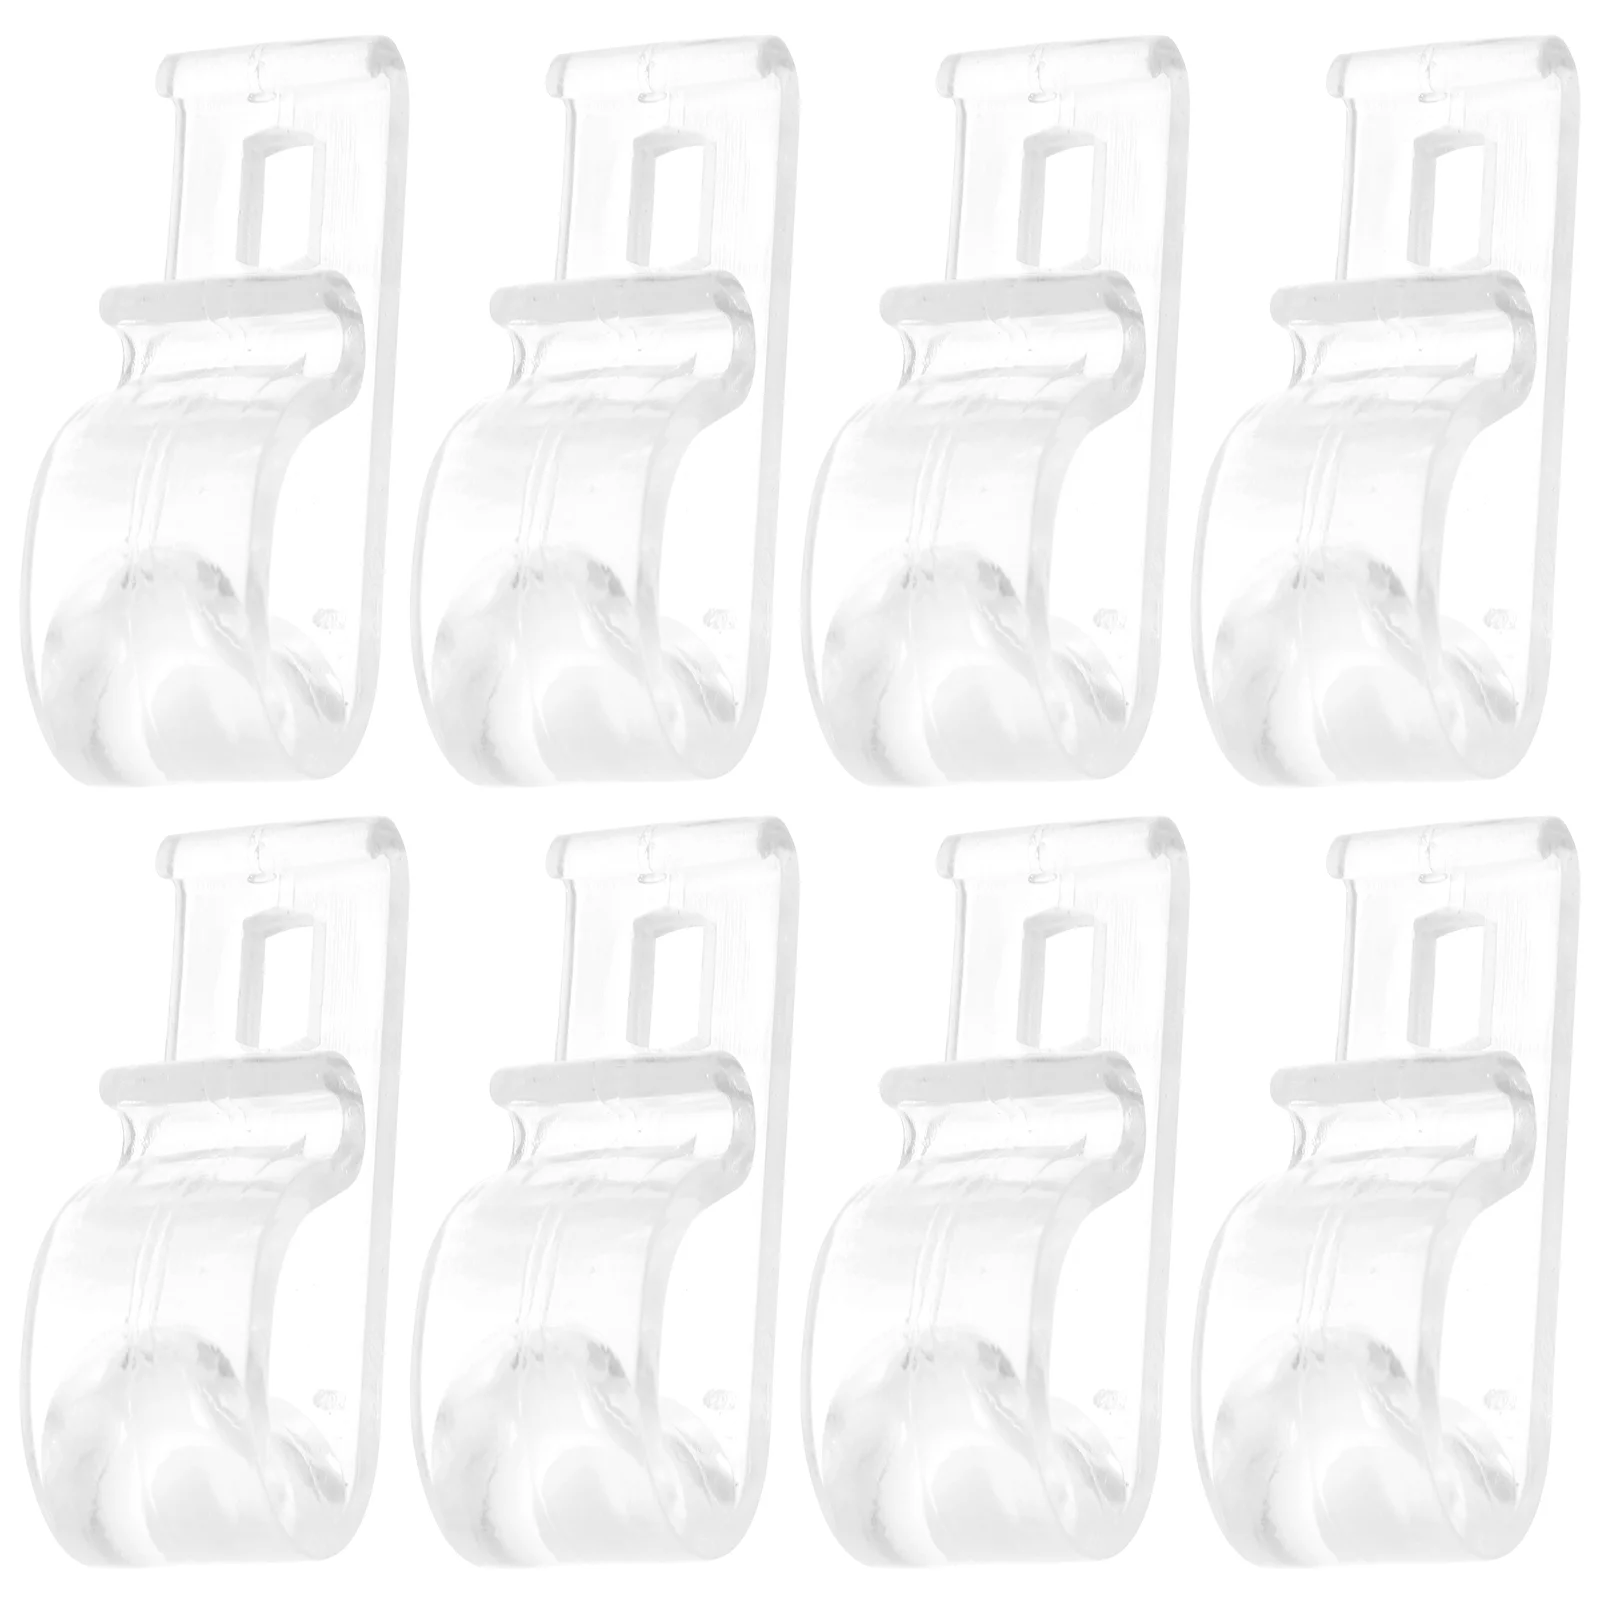 

8 Pcs Clear Curtain Clips Roller Shade Curtains Window Treatments Hooks Blind Cord Holder